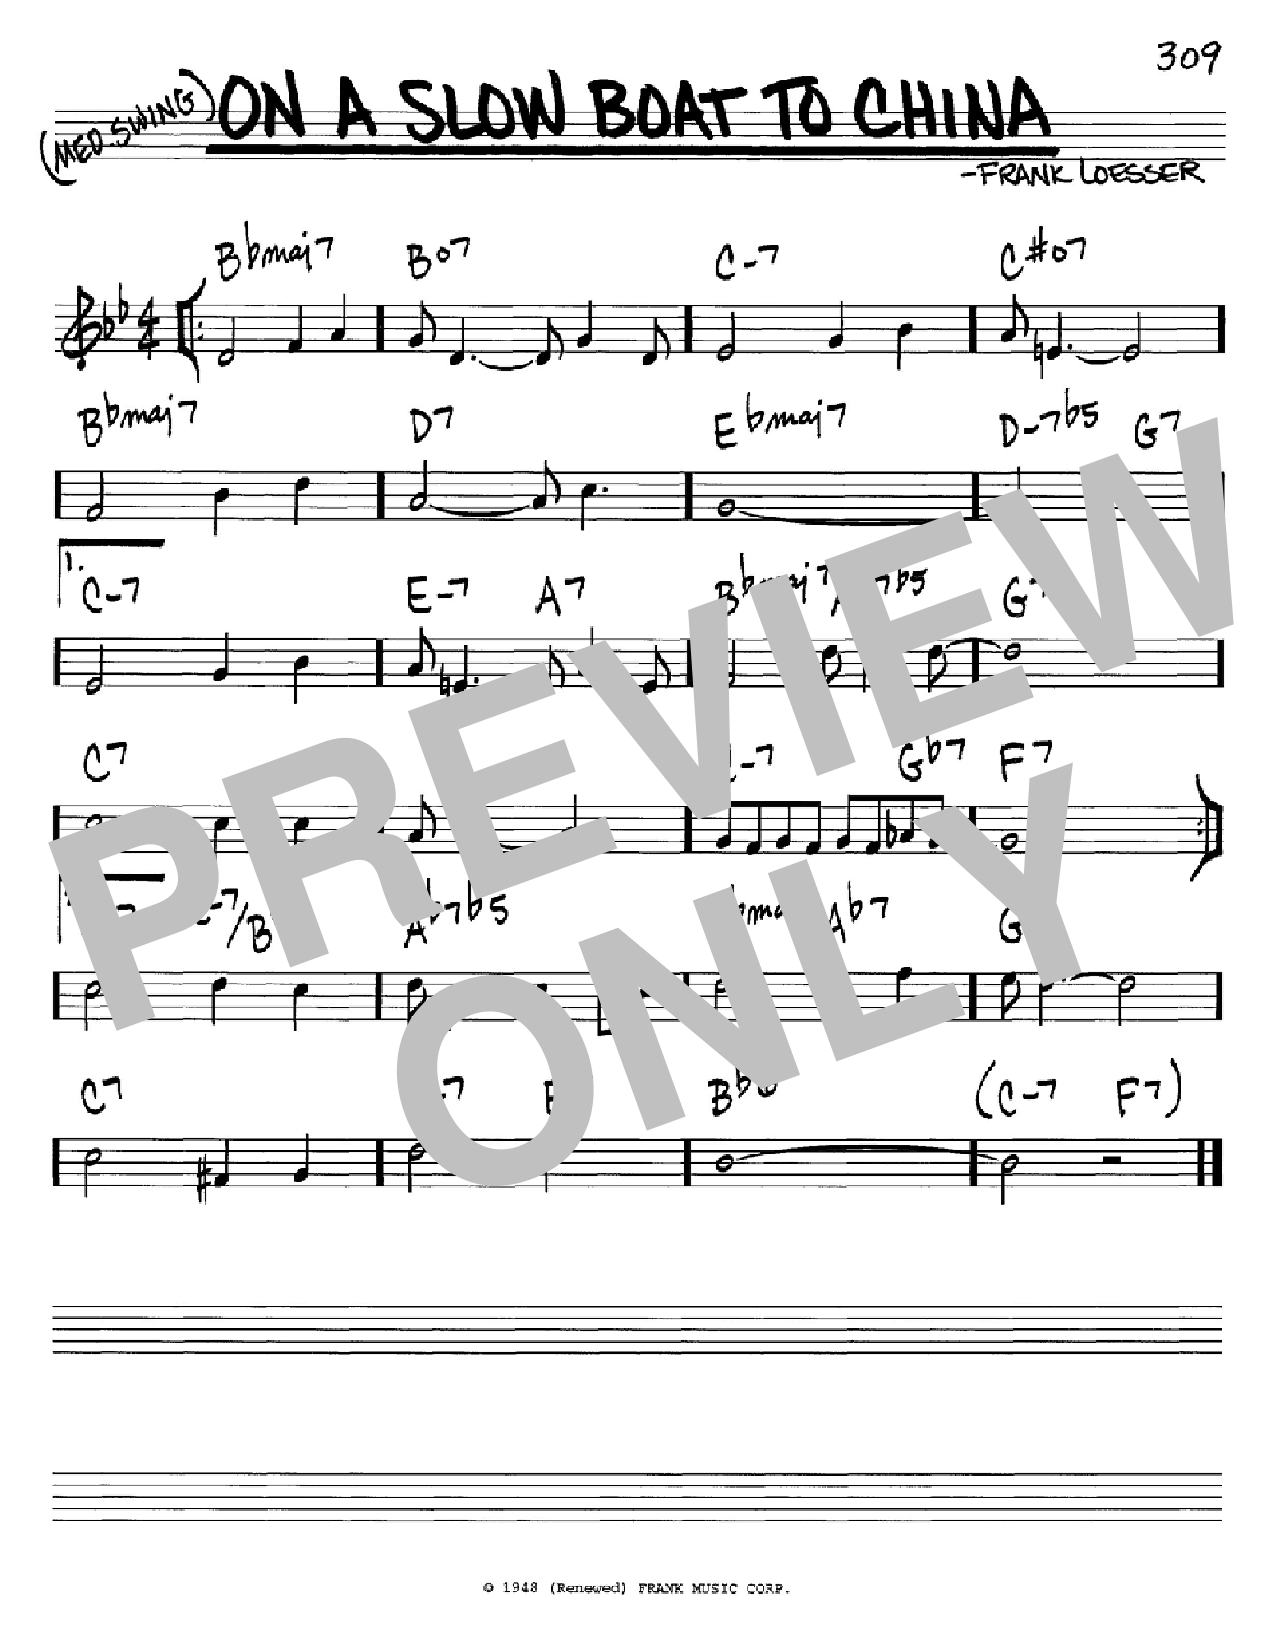 Download Frank Loesser On A Slow Boat To China Sheet Music